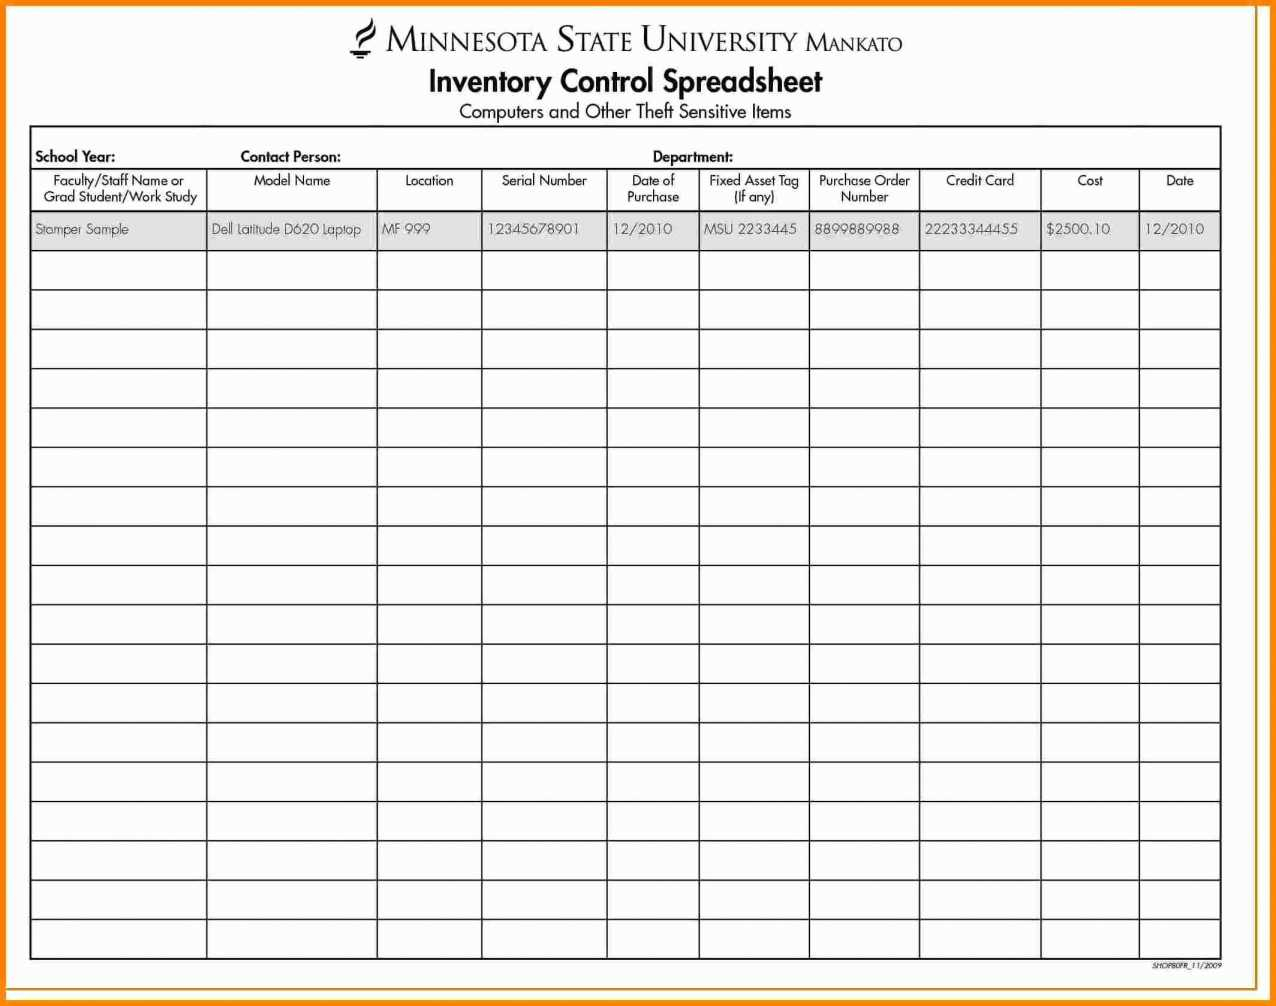 Inventory Control Sheets Free Download | Worksheet &amp; Spreadsheet 2018 intended for Inventory Control Spreadsheet